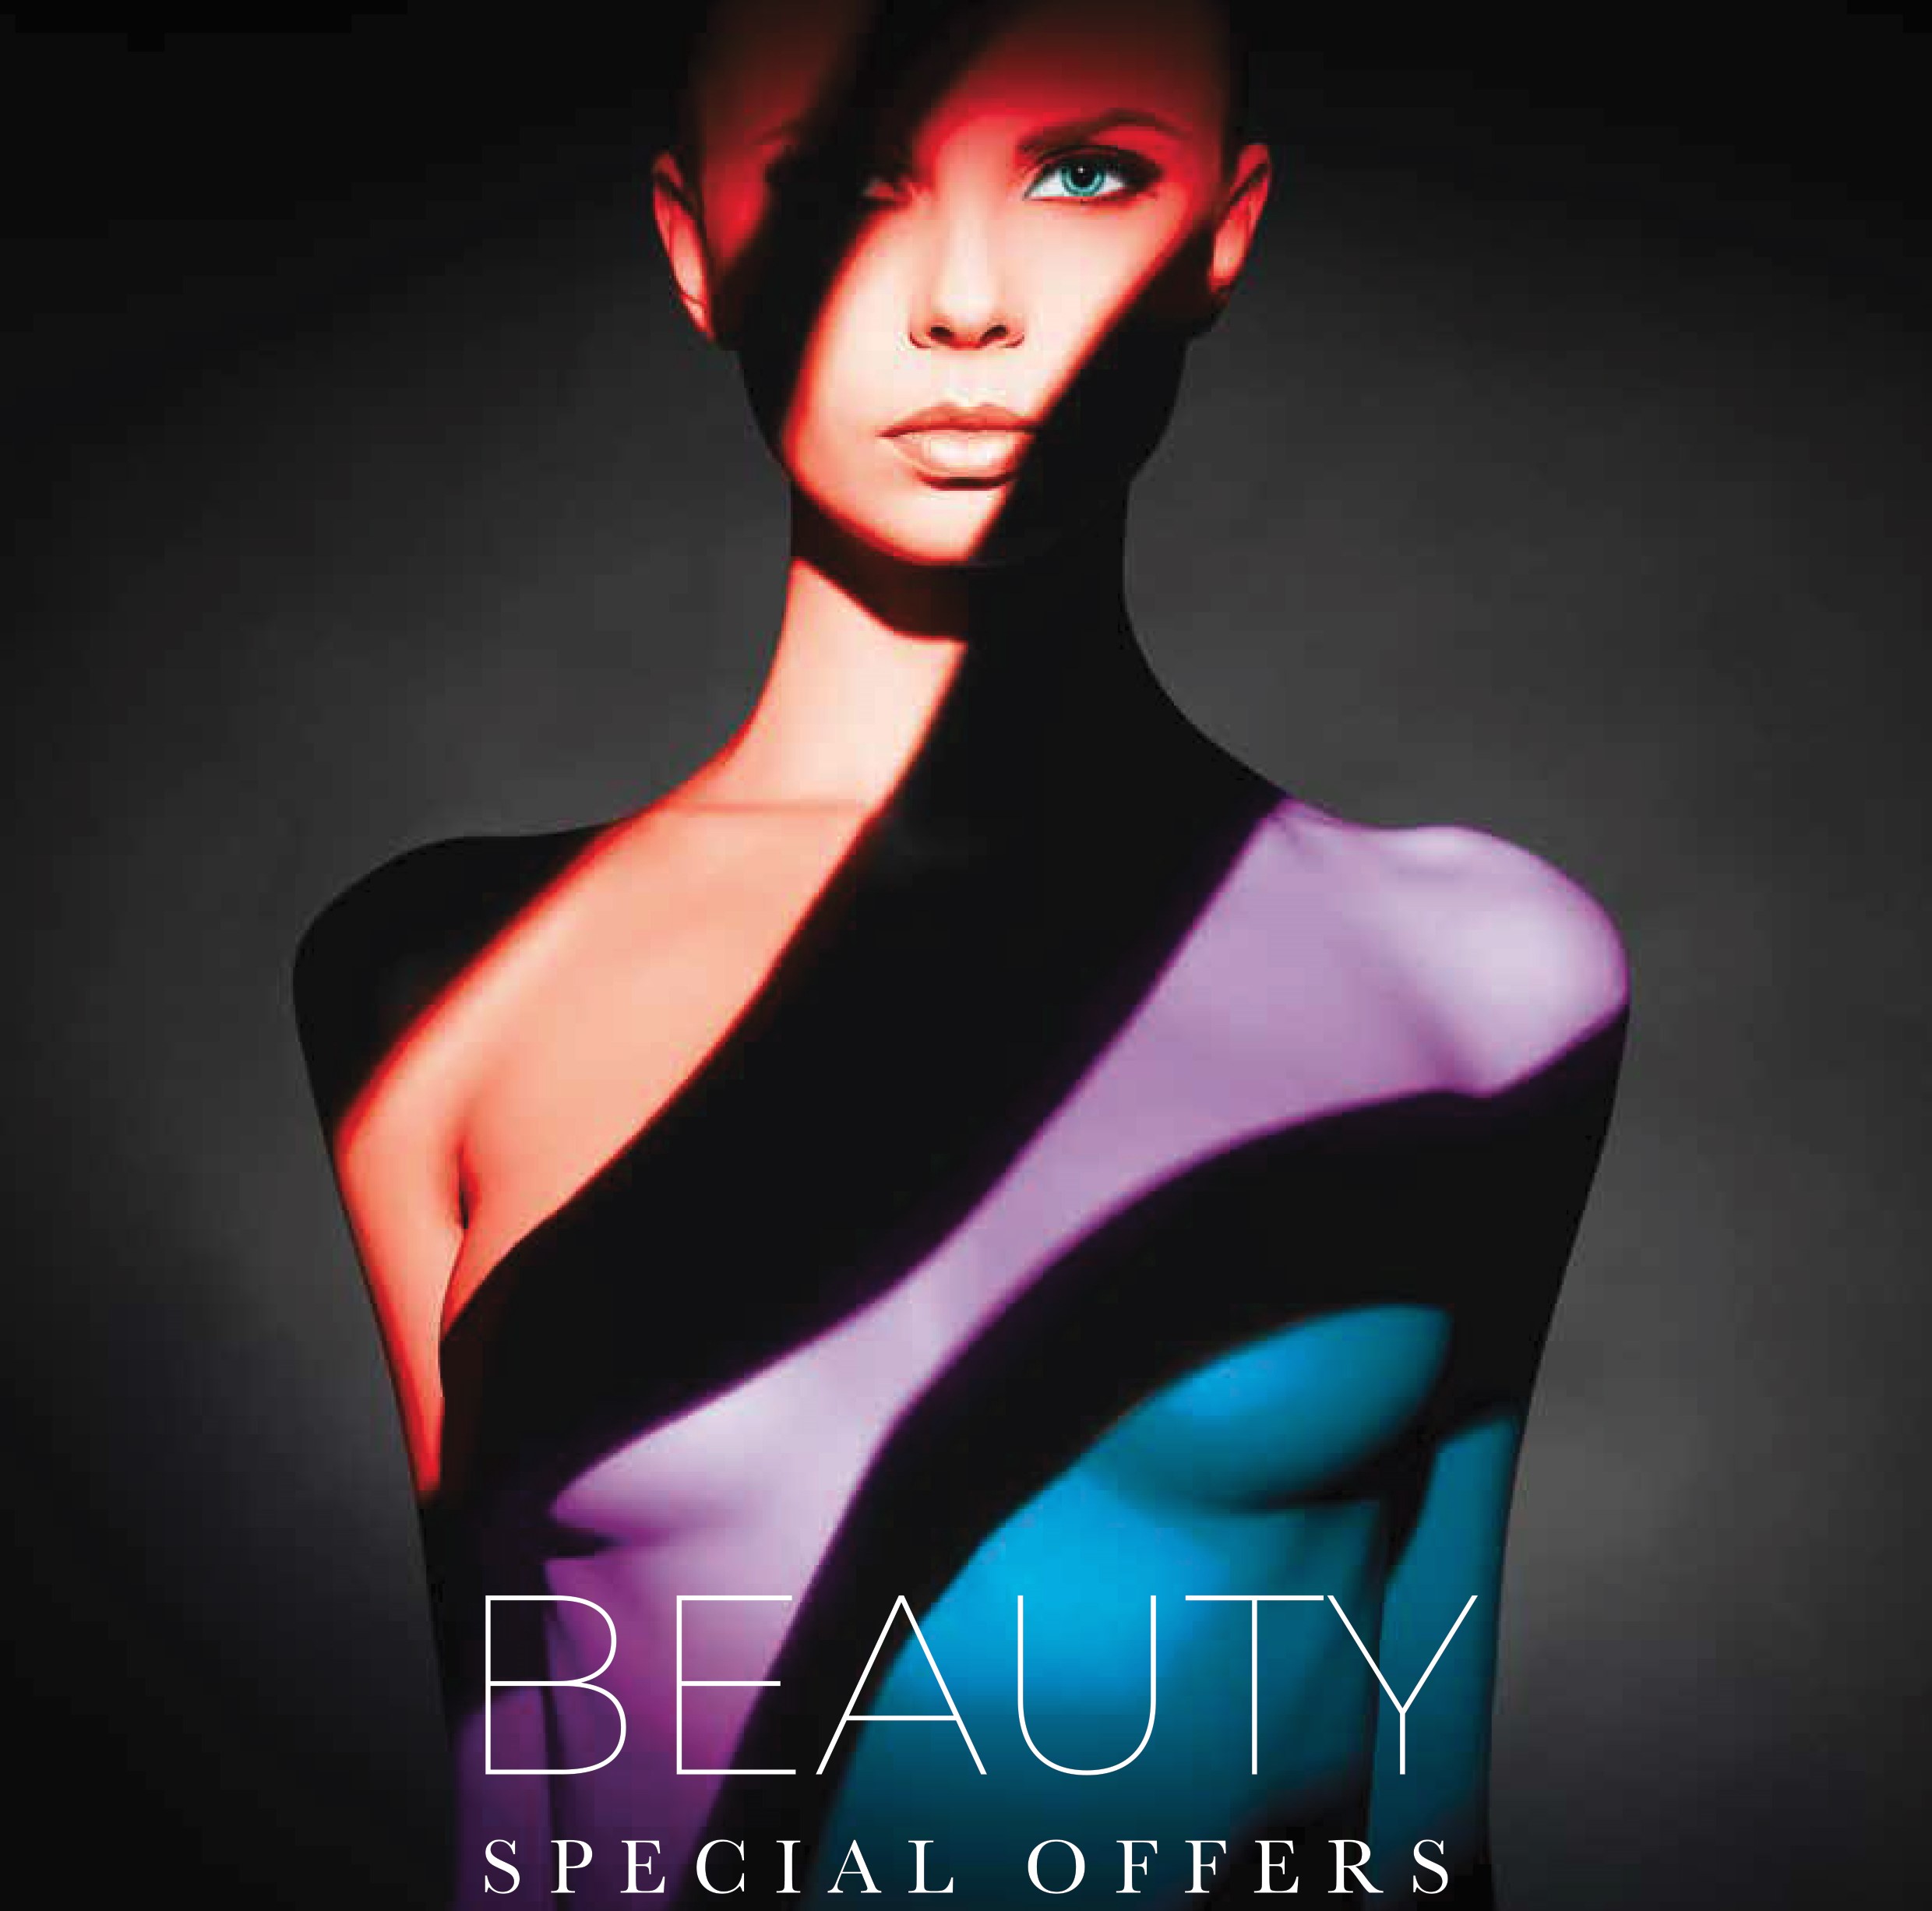 BEAUTY SPECIAL OFFERS